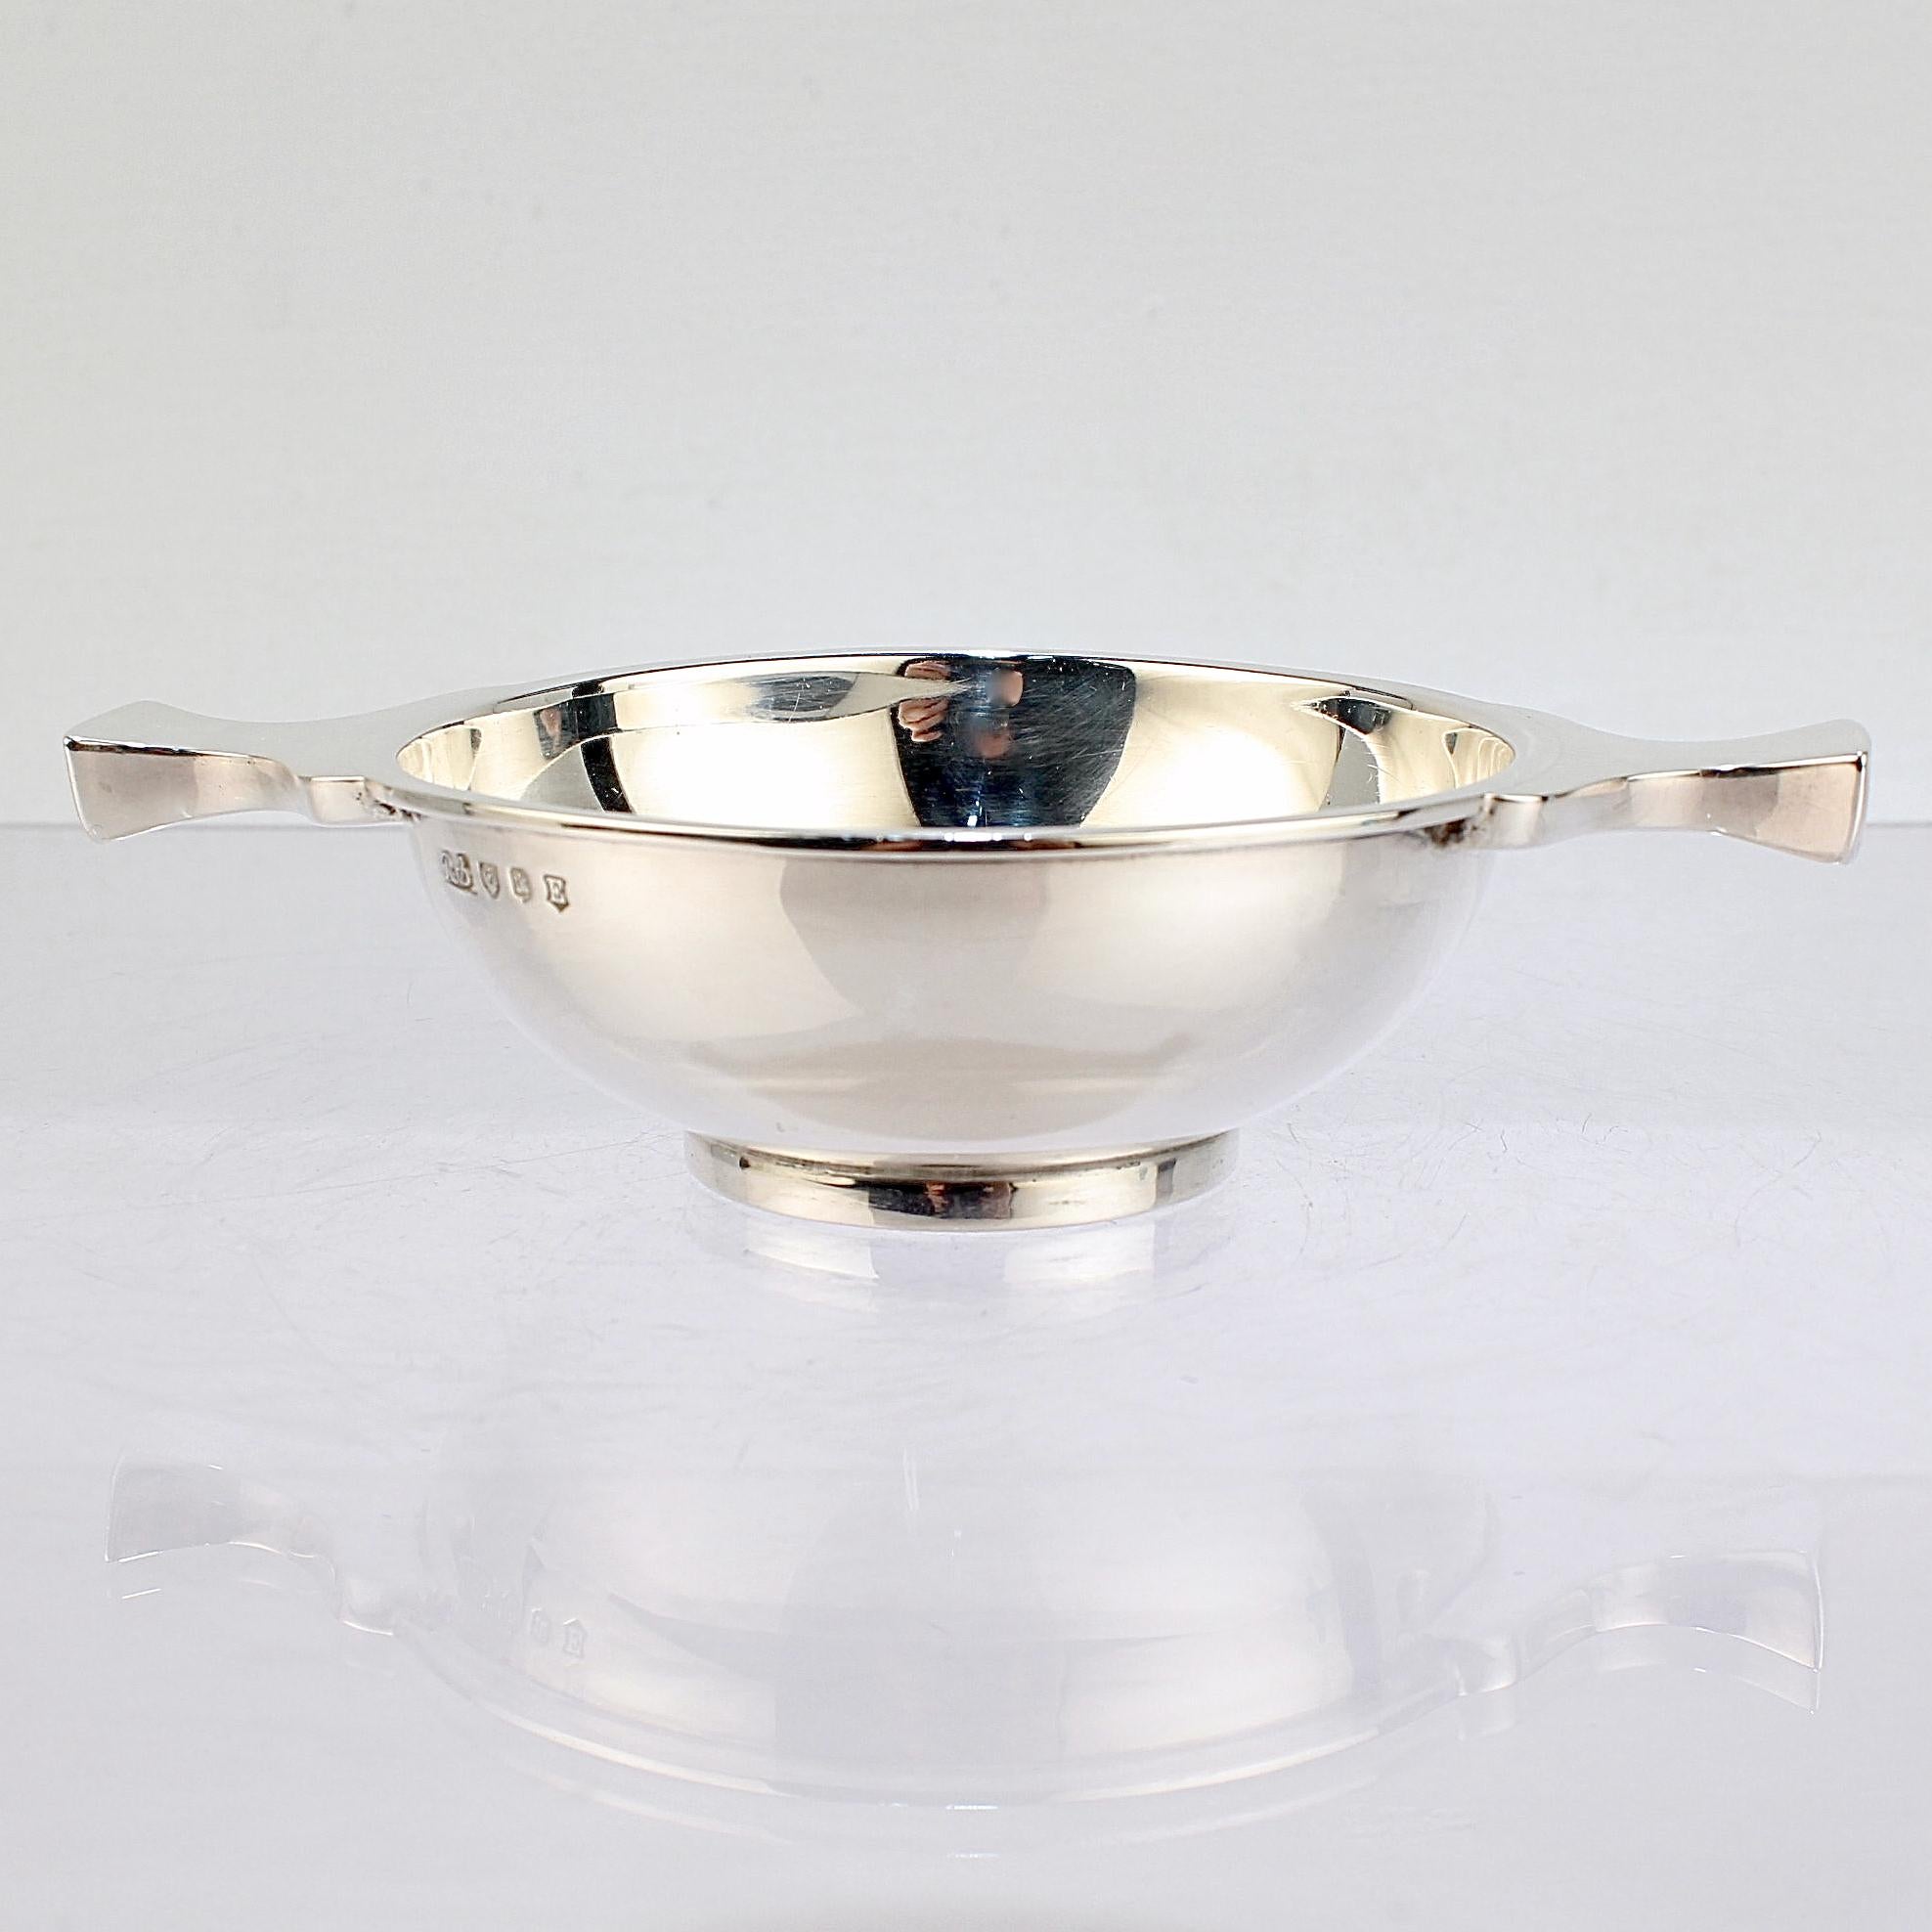 A fine Scottish quaich.

In sterling silver.

Smithed by Robert Sawers of Edinburgh in 1901.

The quaich is a 2-handed drinking cup or bowl that was traditionally used to drink whiskey or brandy. 

Simply a wonderful piece of Scottish